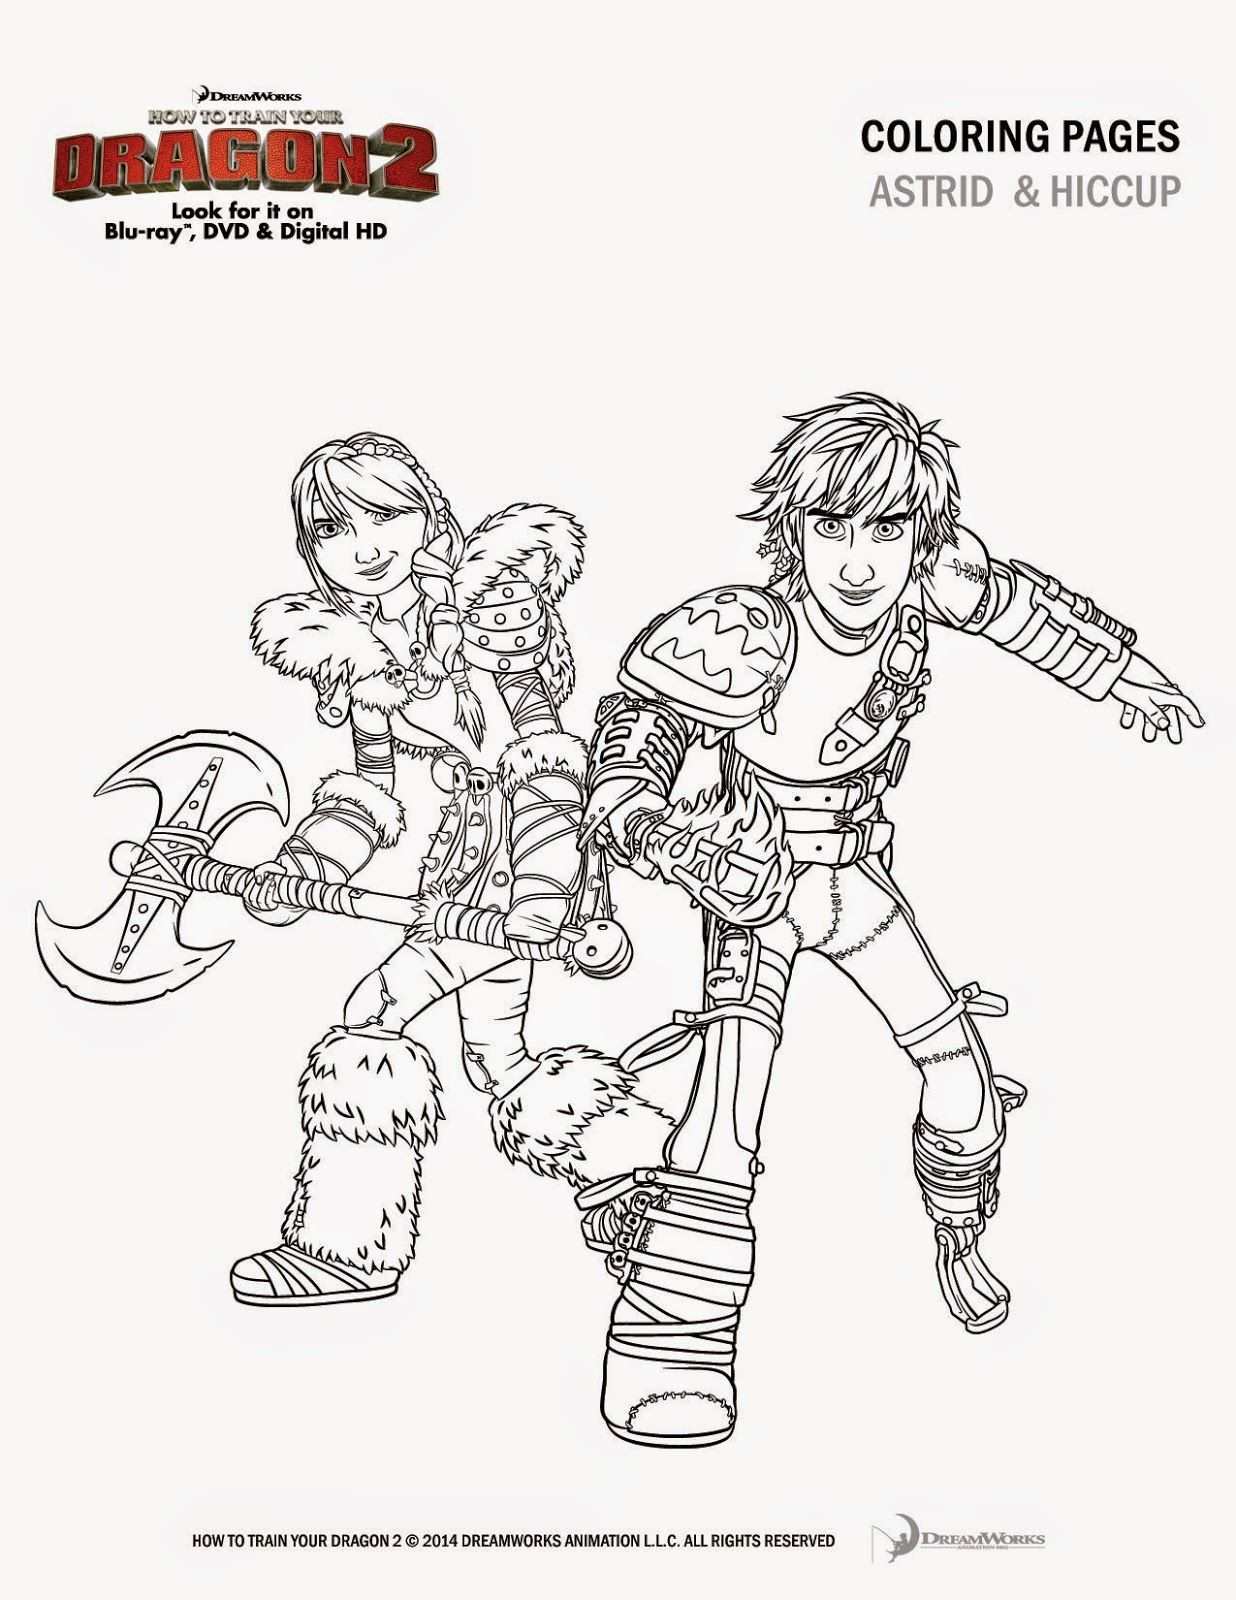 Coloring Sheet How To Train Your Dragon 2 In Blu Ray Dvd Dragonsinsiders Httyd2 Drago